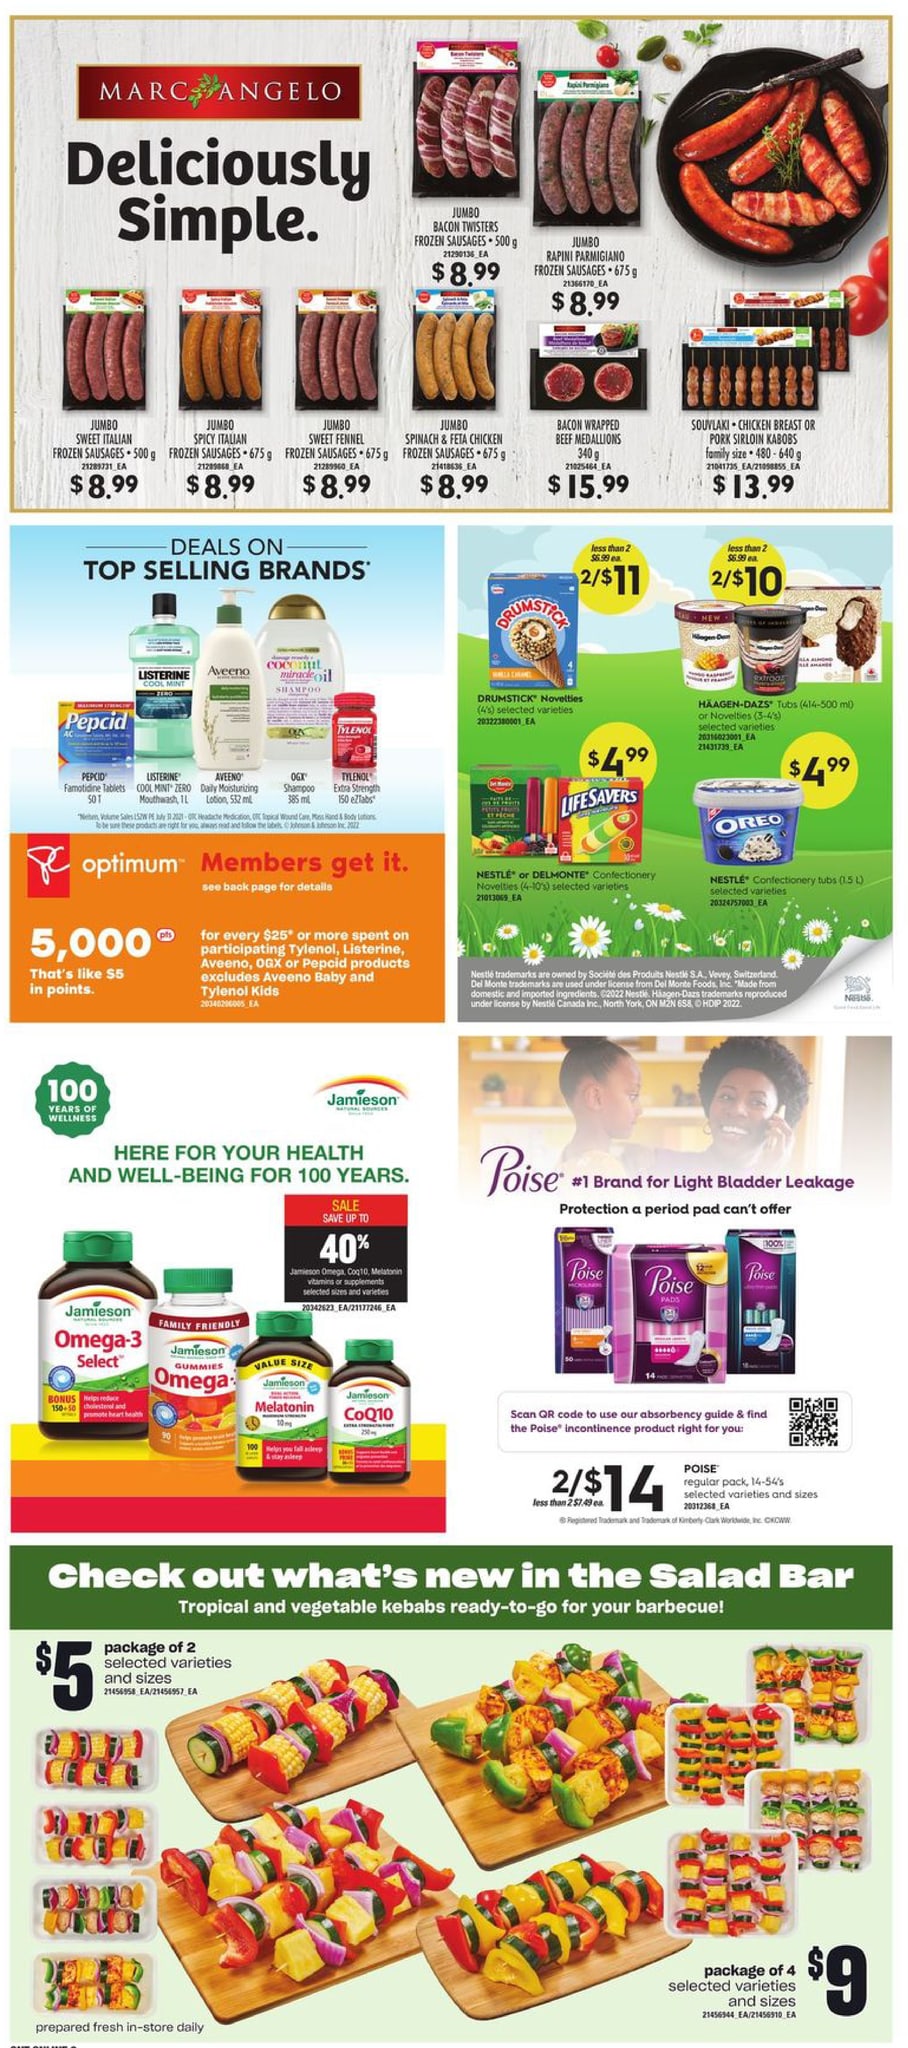 Zehrs - Weekly Flyer Specials - Page 11